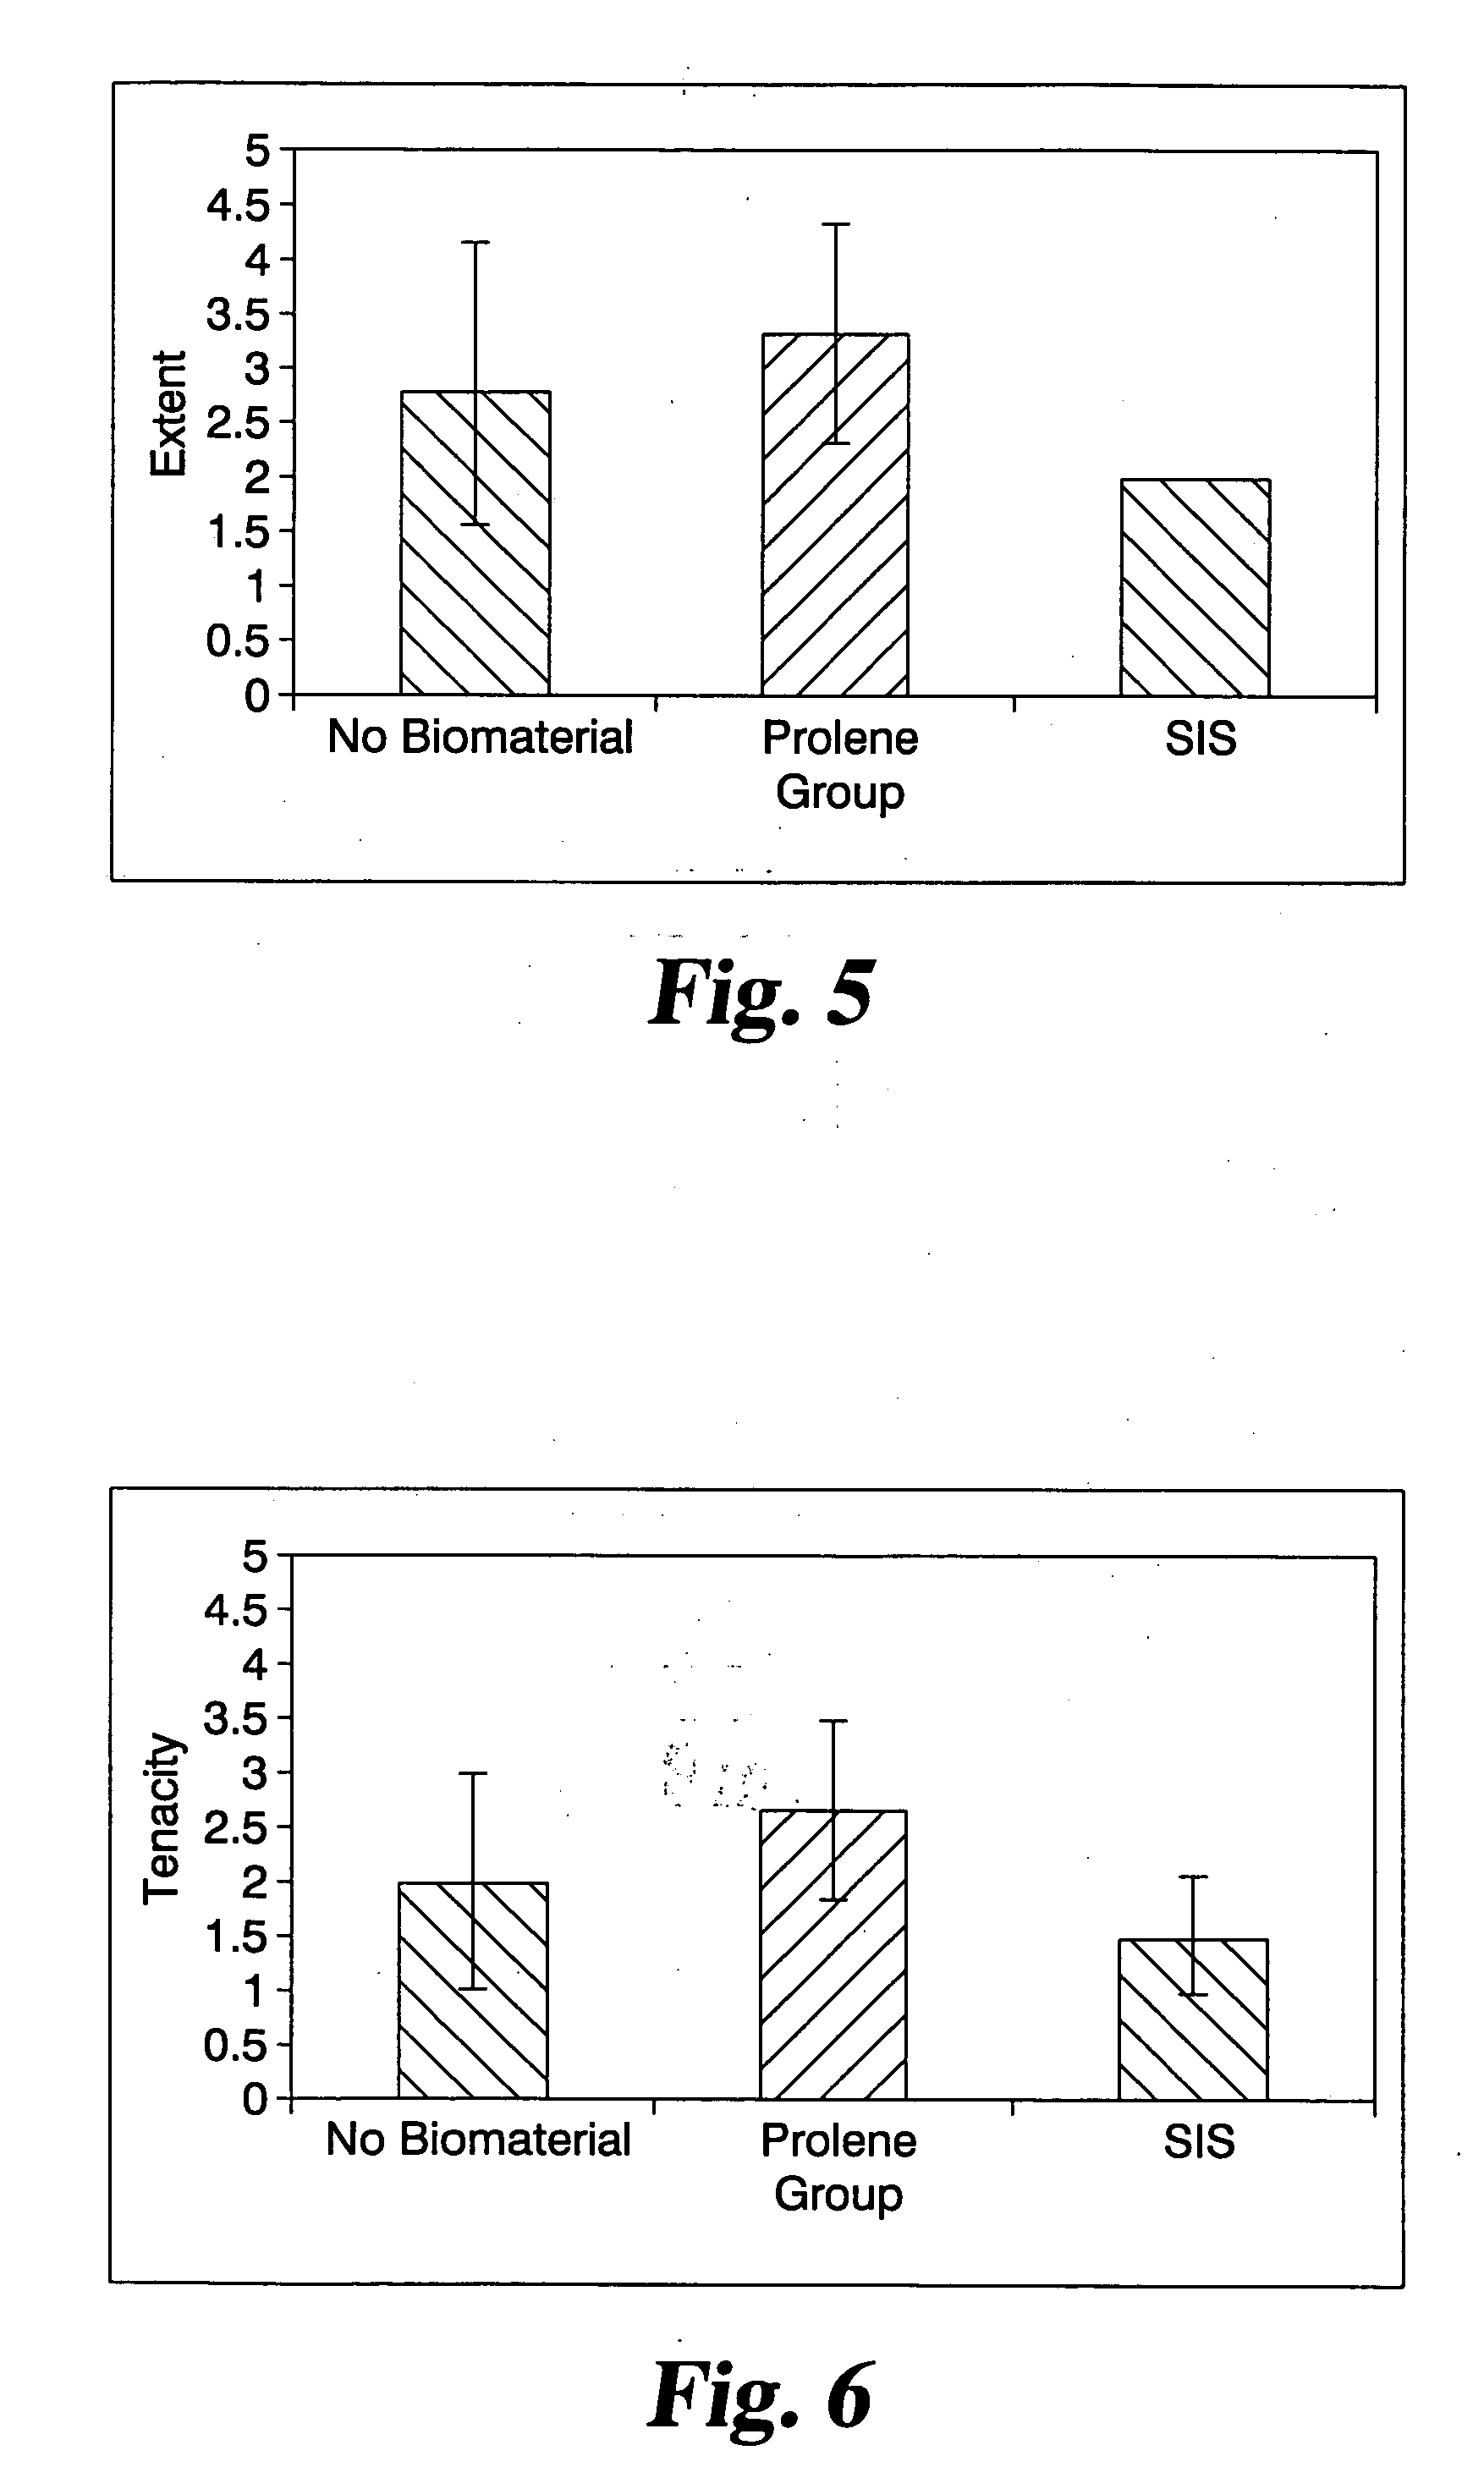 Implantable materials and methods for inhibiting tissue adhesion formation